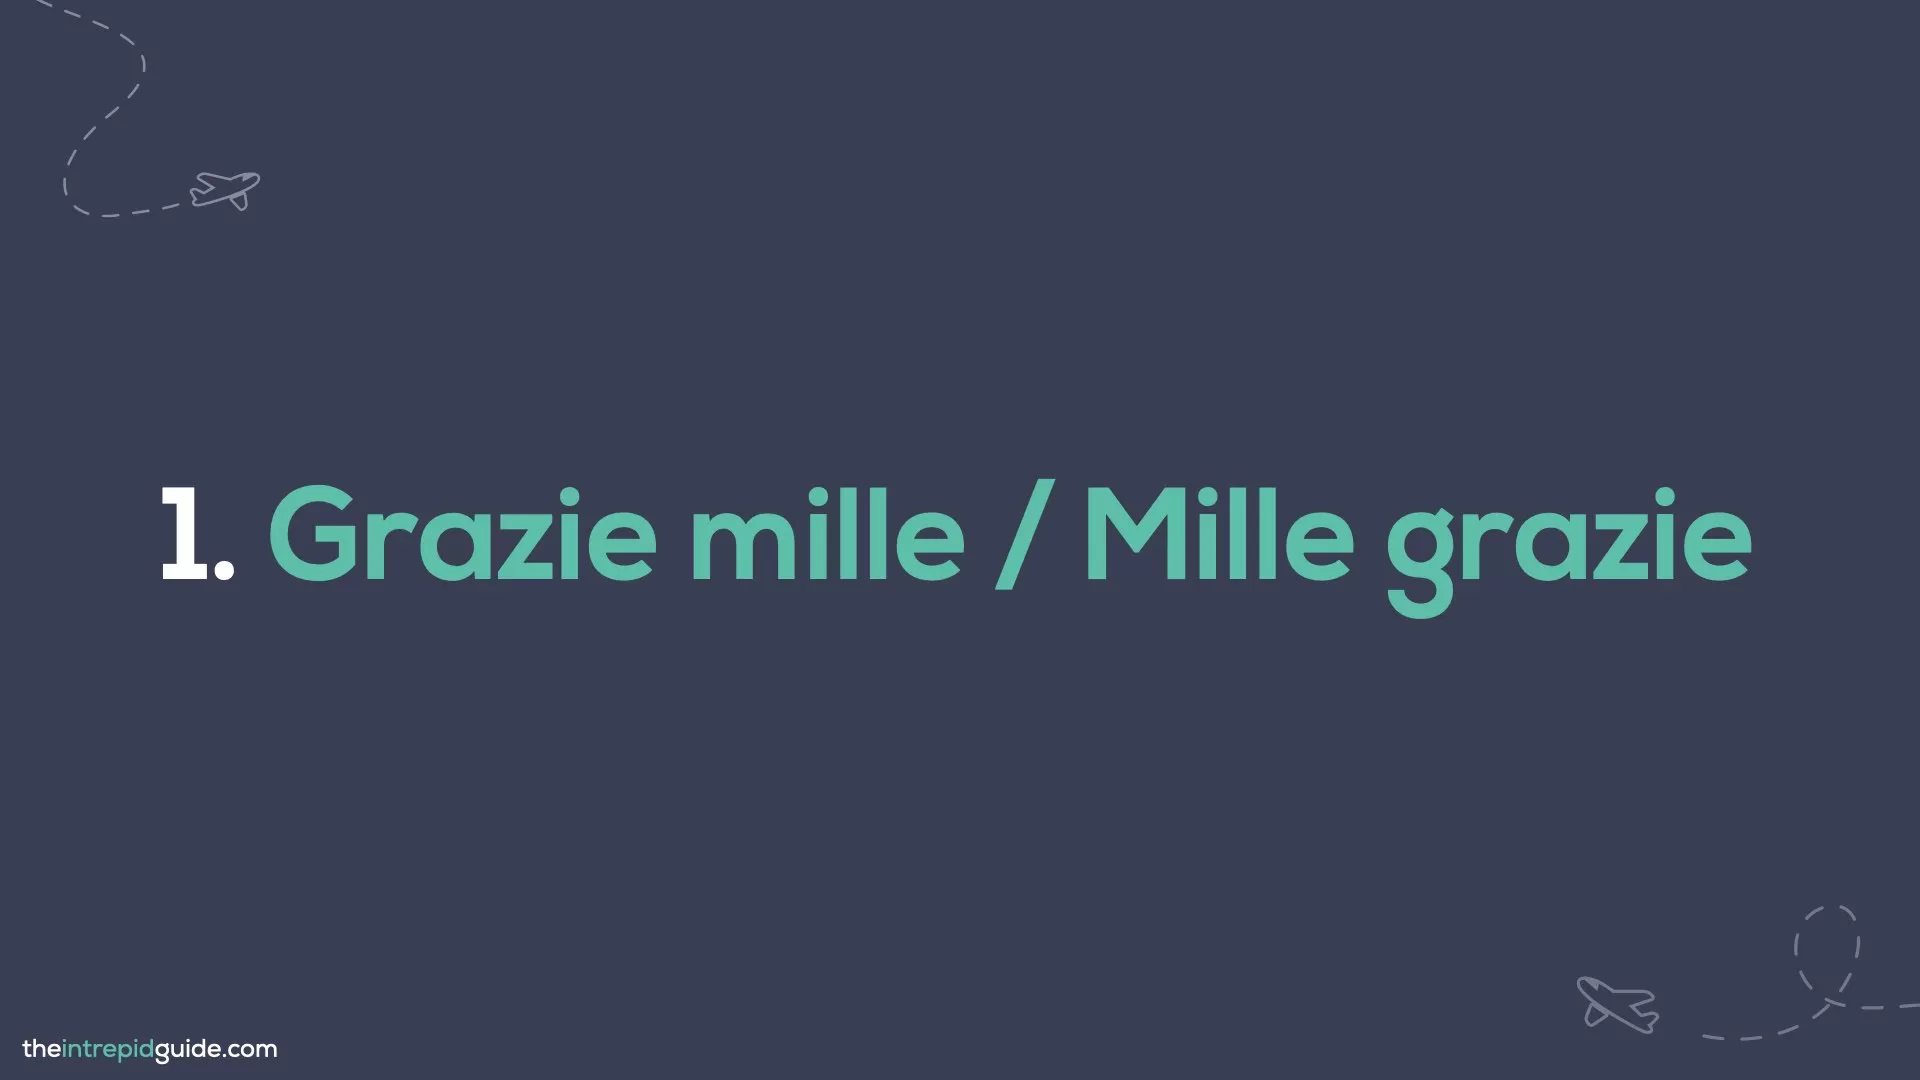 How to say thank you in Italian - Grazie mille - Mille grazie